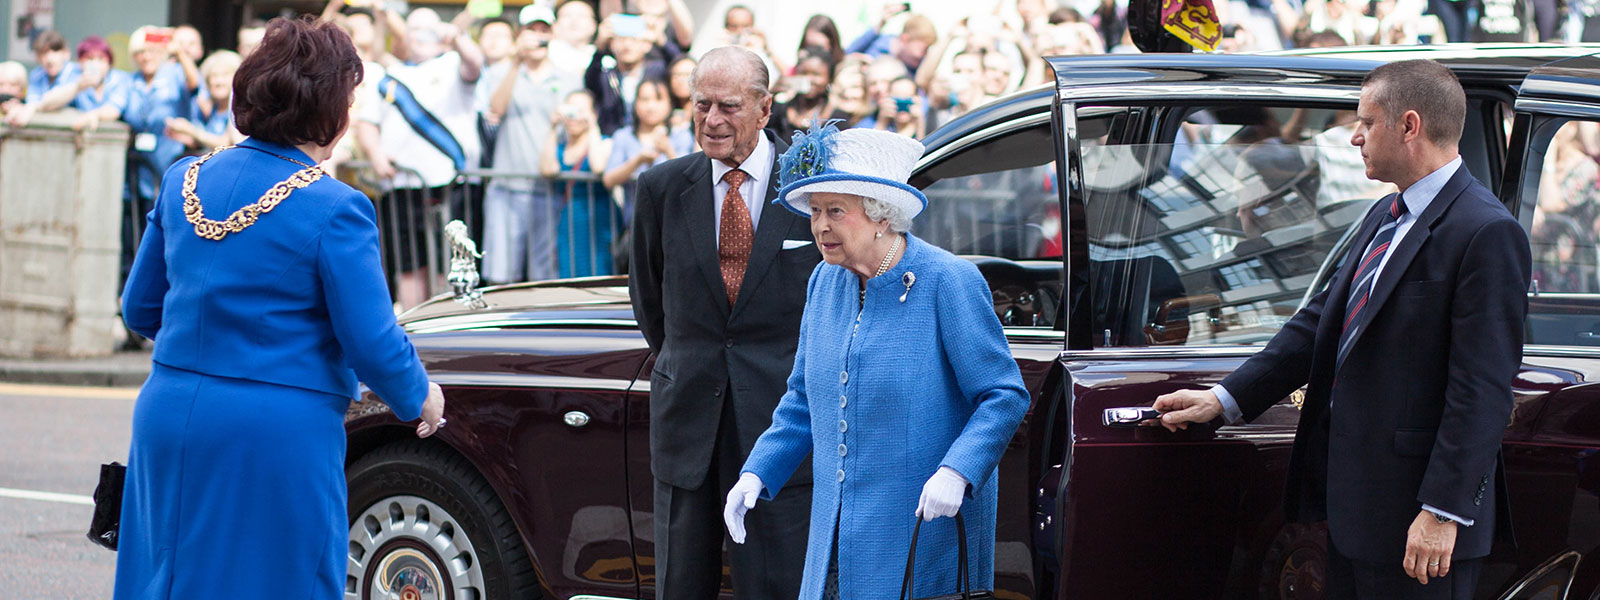 The Queen and The Duke of Edinburgh arrive at the Technology & Innovation Centre.